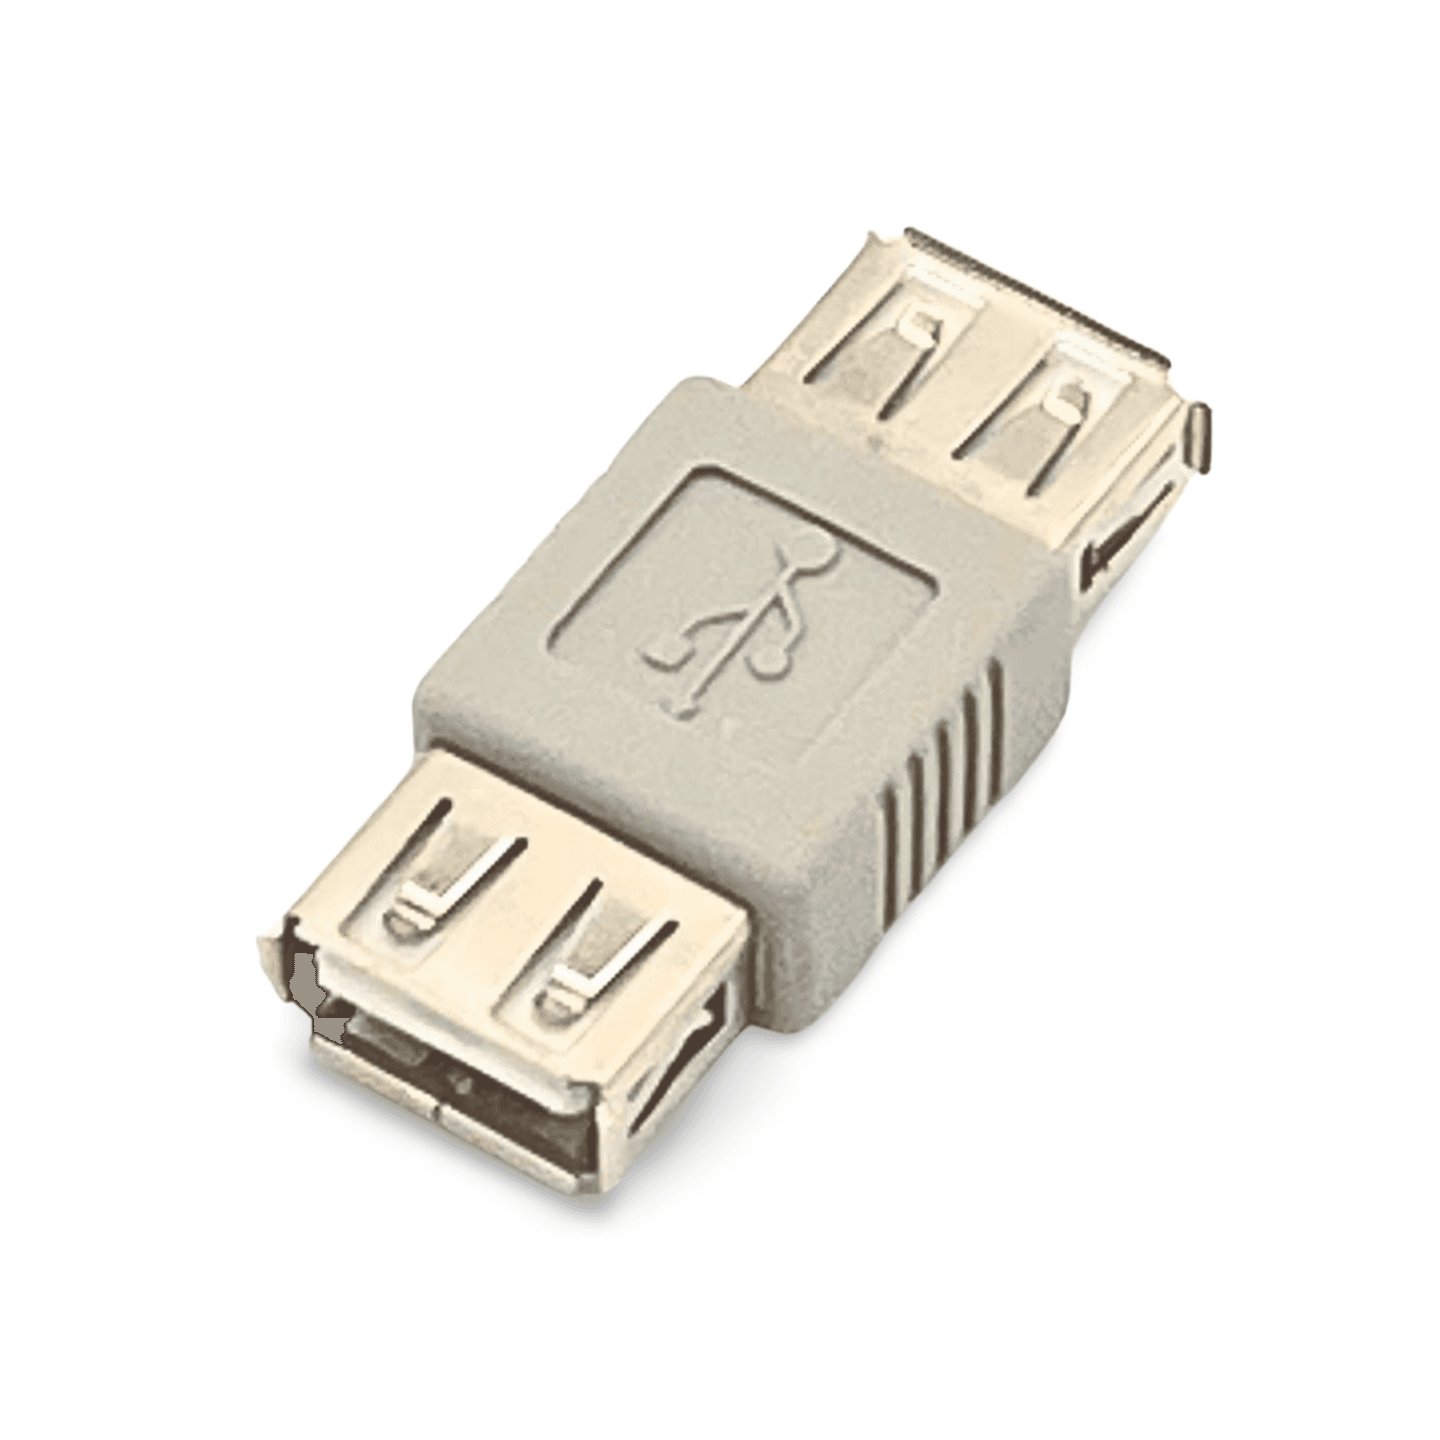 1in USB 2.0 Slim Gender Change Type A Female to Female Adapter Coupler beige